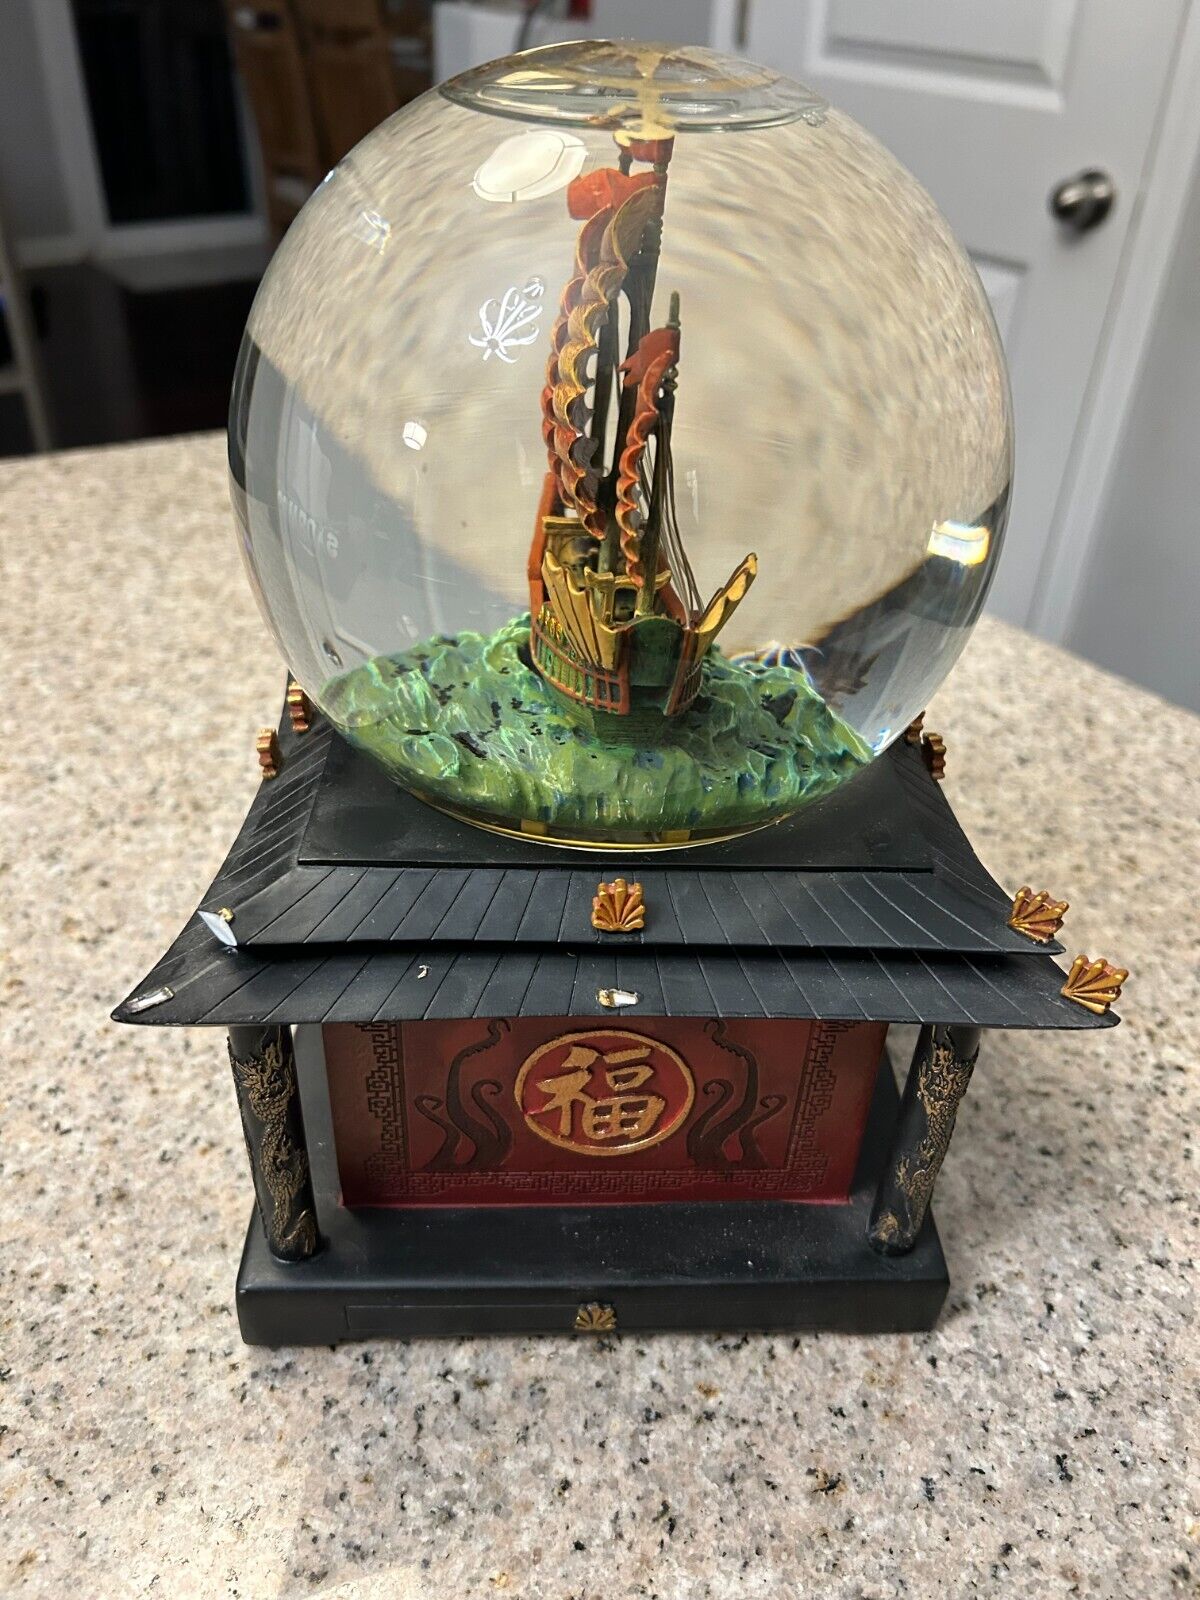 RARE Large Snow Globe Pirates of the Caribbean Worlds End Light Up Music Box